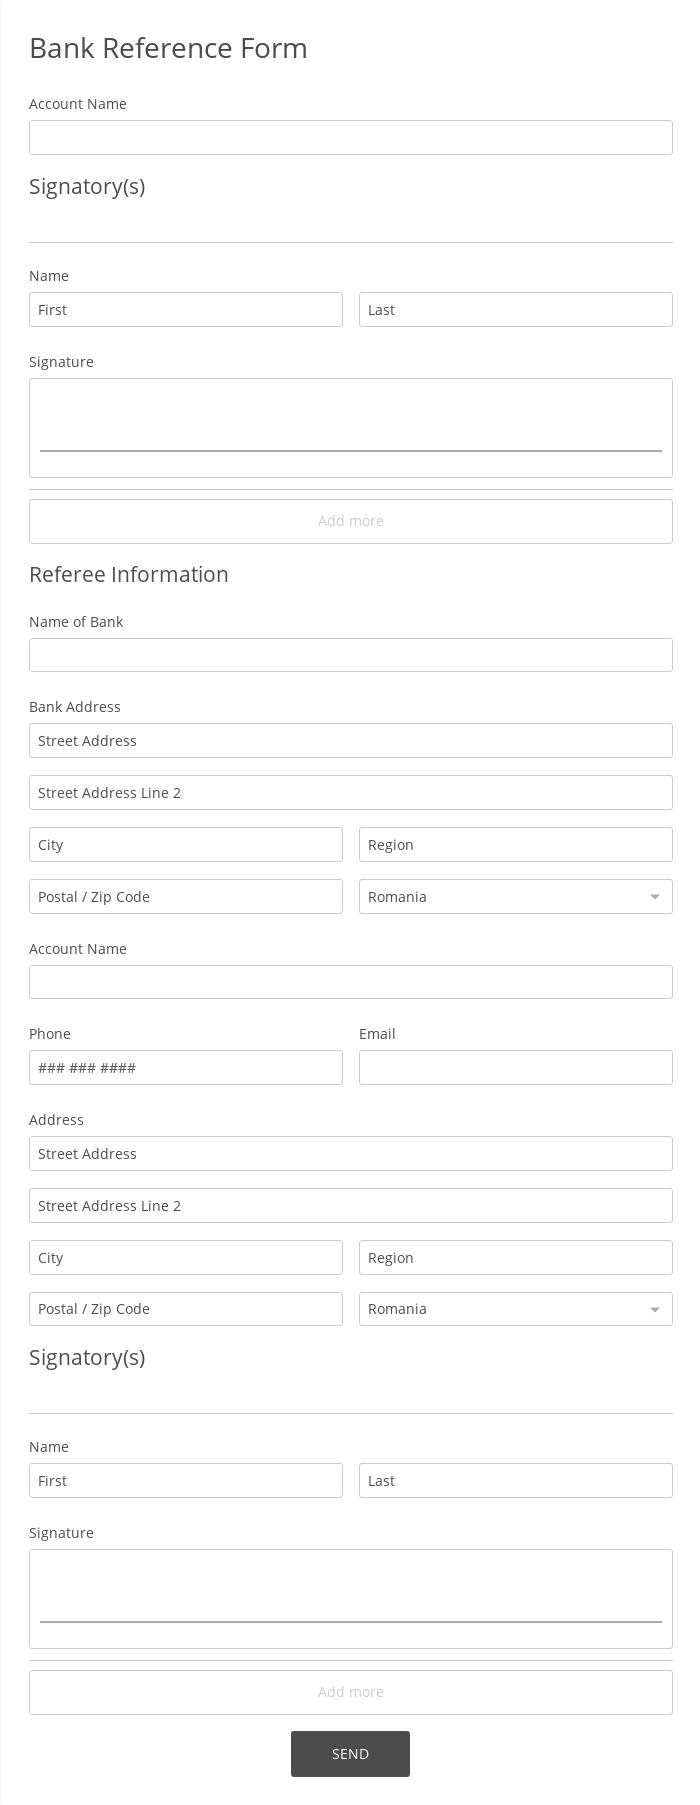 Bank Reference Form